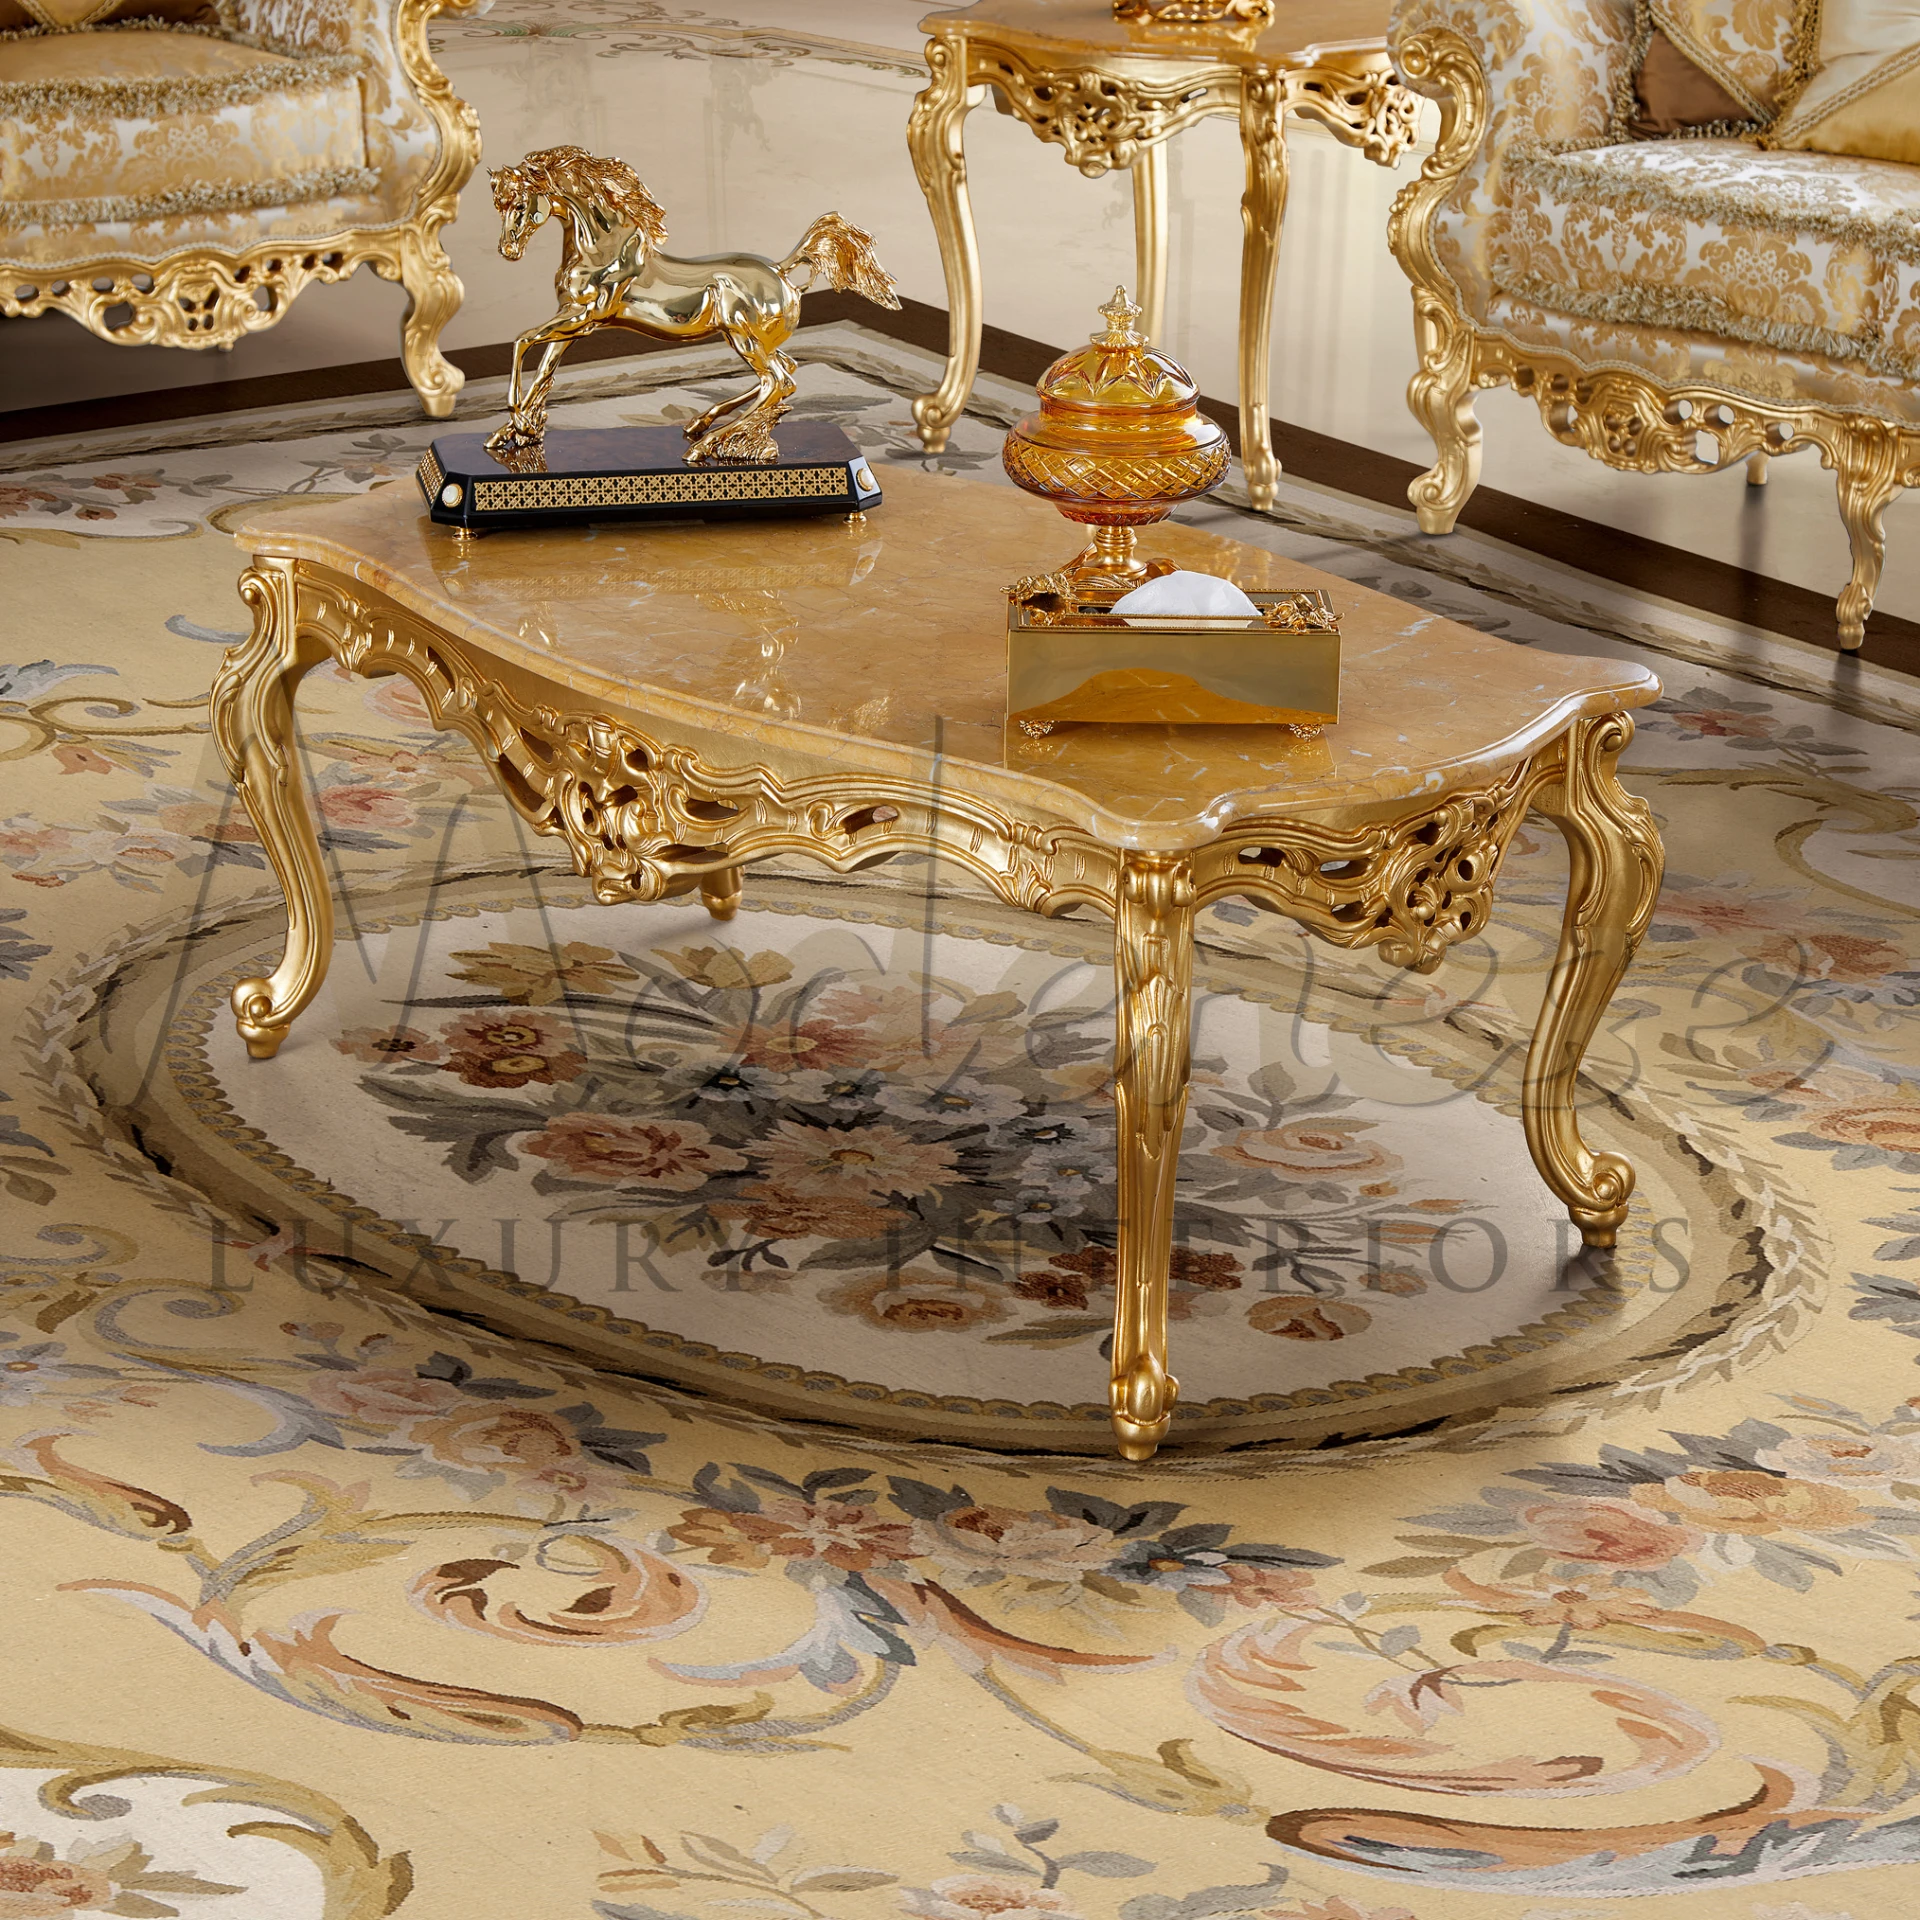 Baroque style coffee table with gilded accents, adding opulence to luxury living spaces.